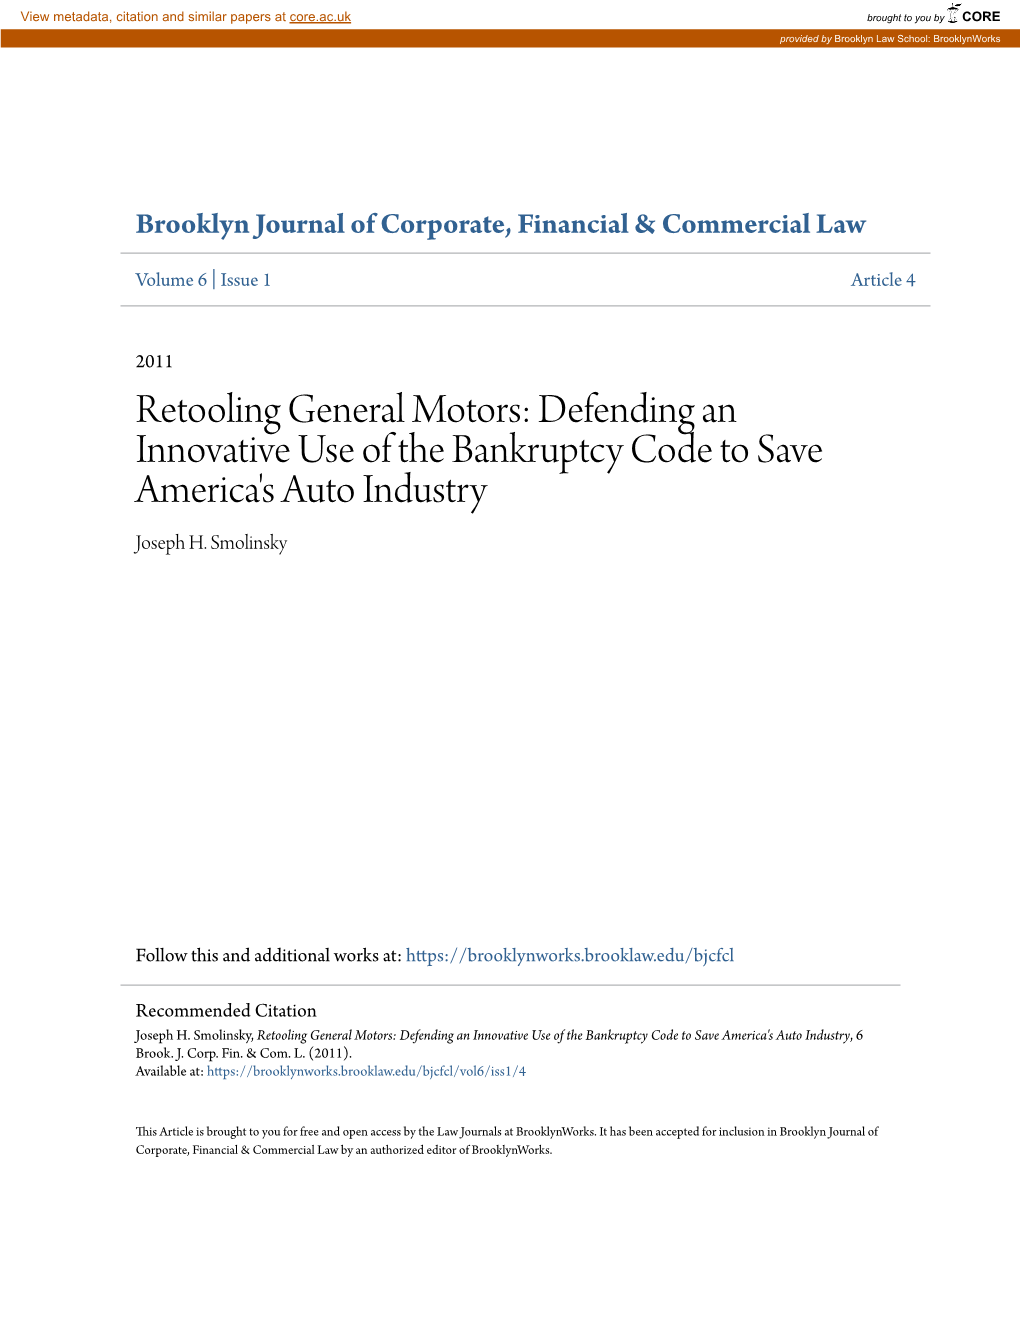 Retooling General Motors: Defending an Innovative Use of the Bankruptcy Code to Save America's Auto Industry Joseph H